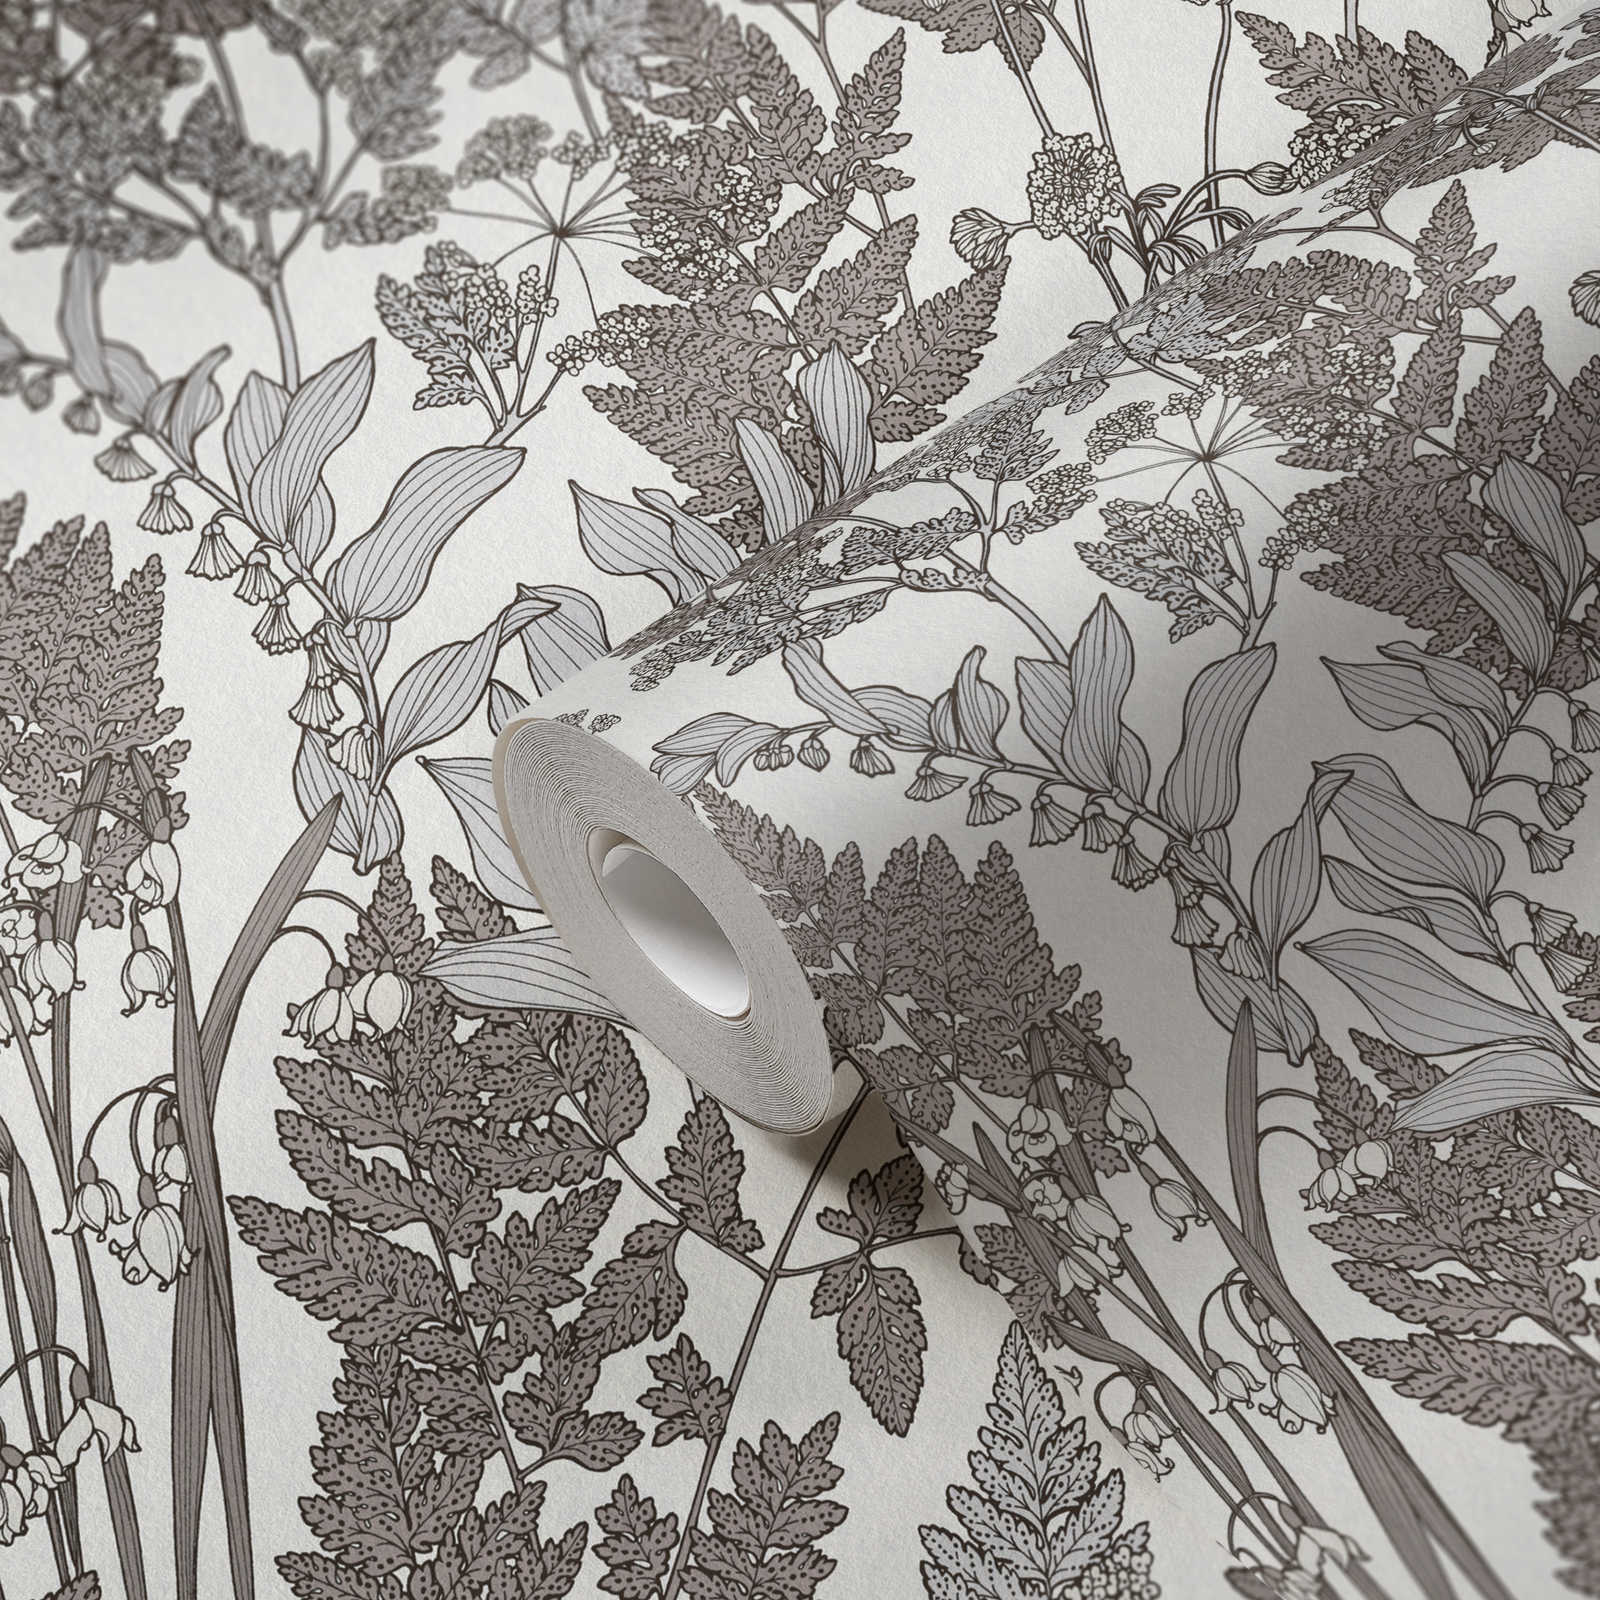             Nature wallpaper leaves & flowers in modern country style - grey, white
        